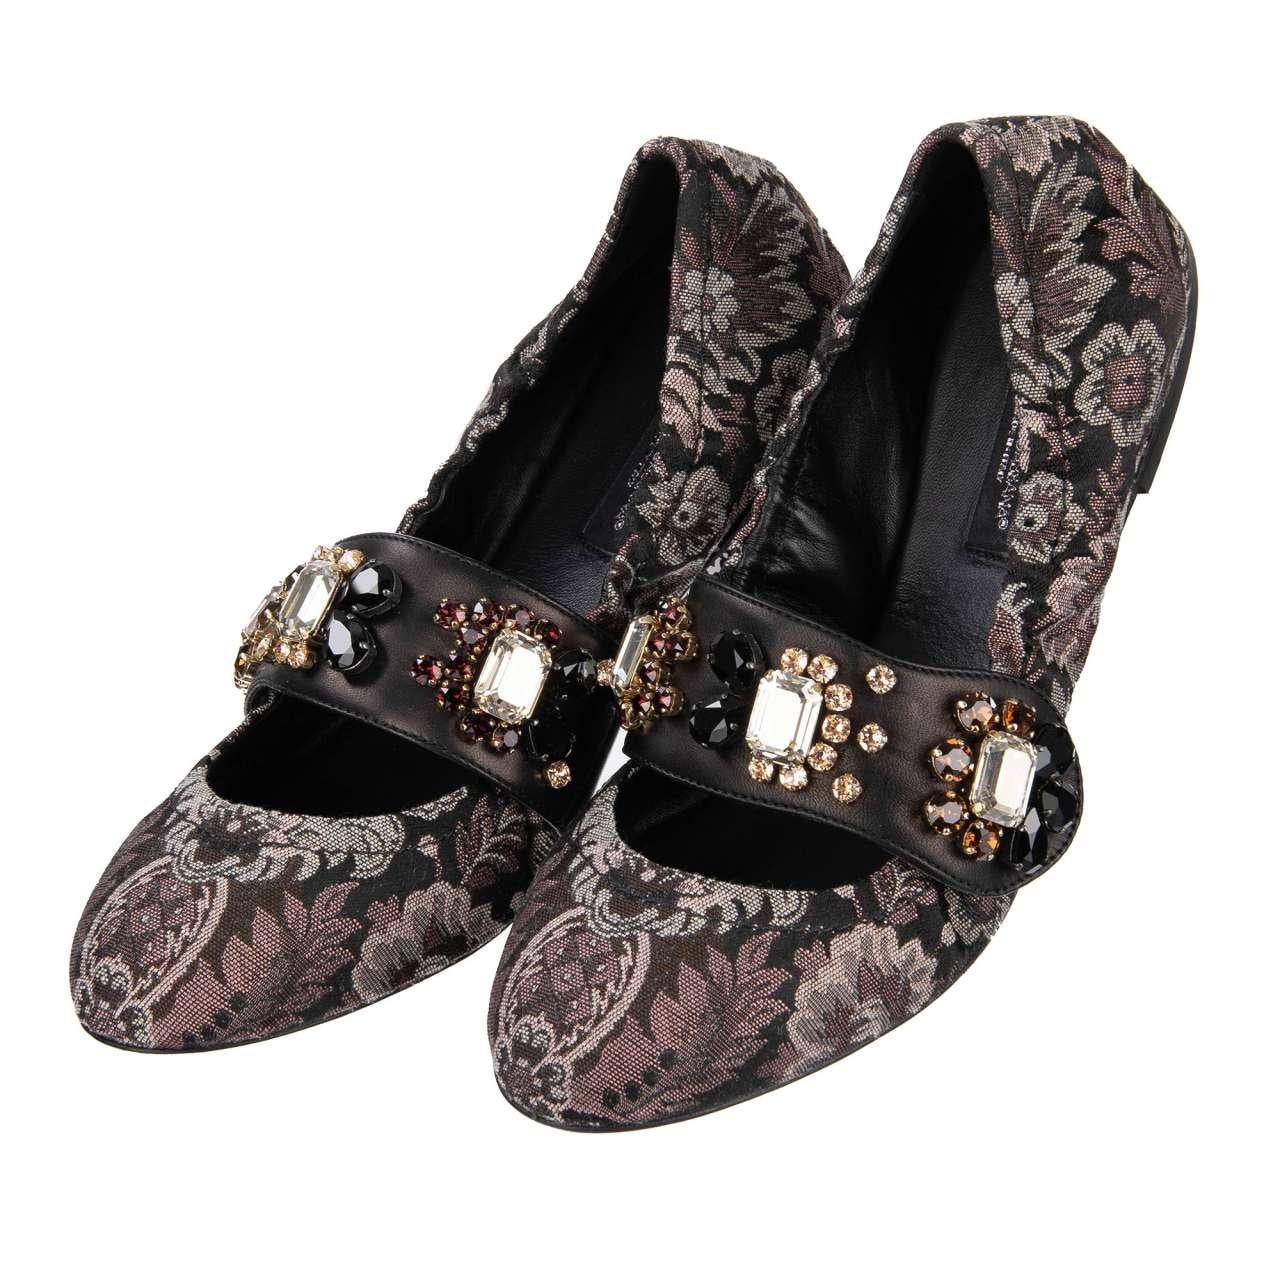 Dolce & Gabbana - Brocade Ballet Flats VALLY with Crystals 38.5 For Sale 3